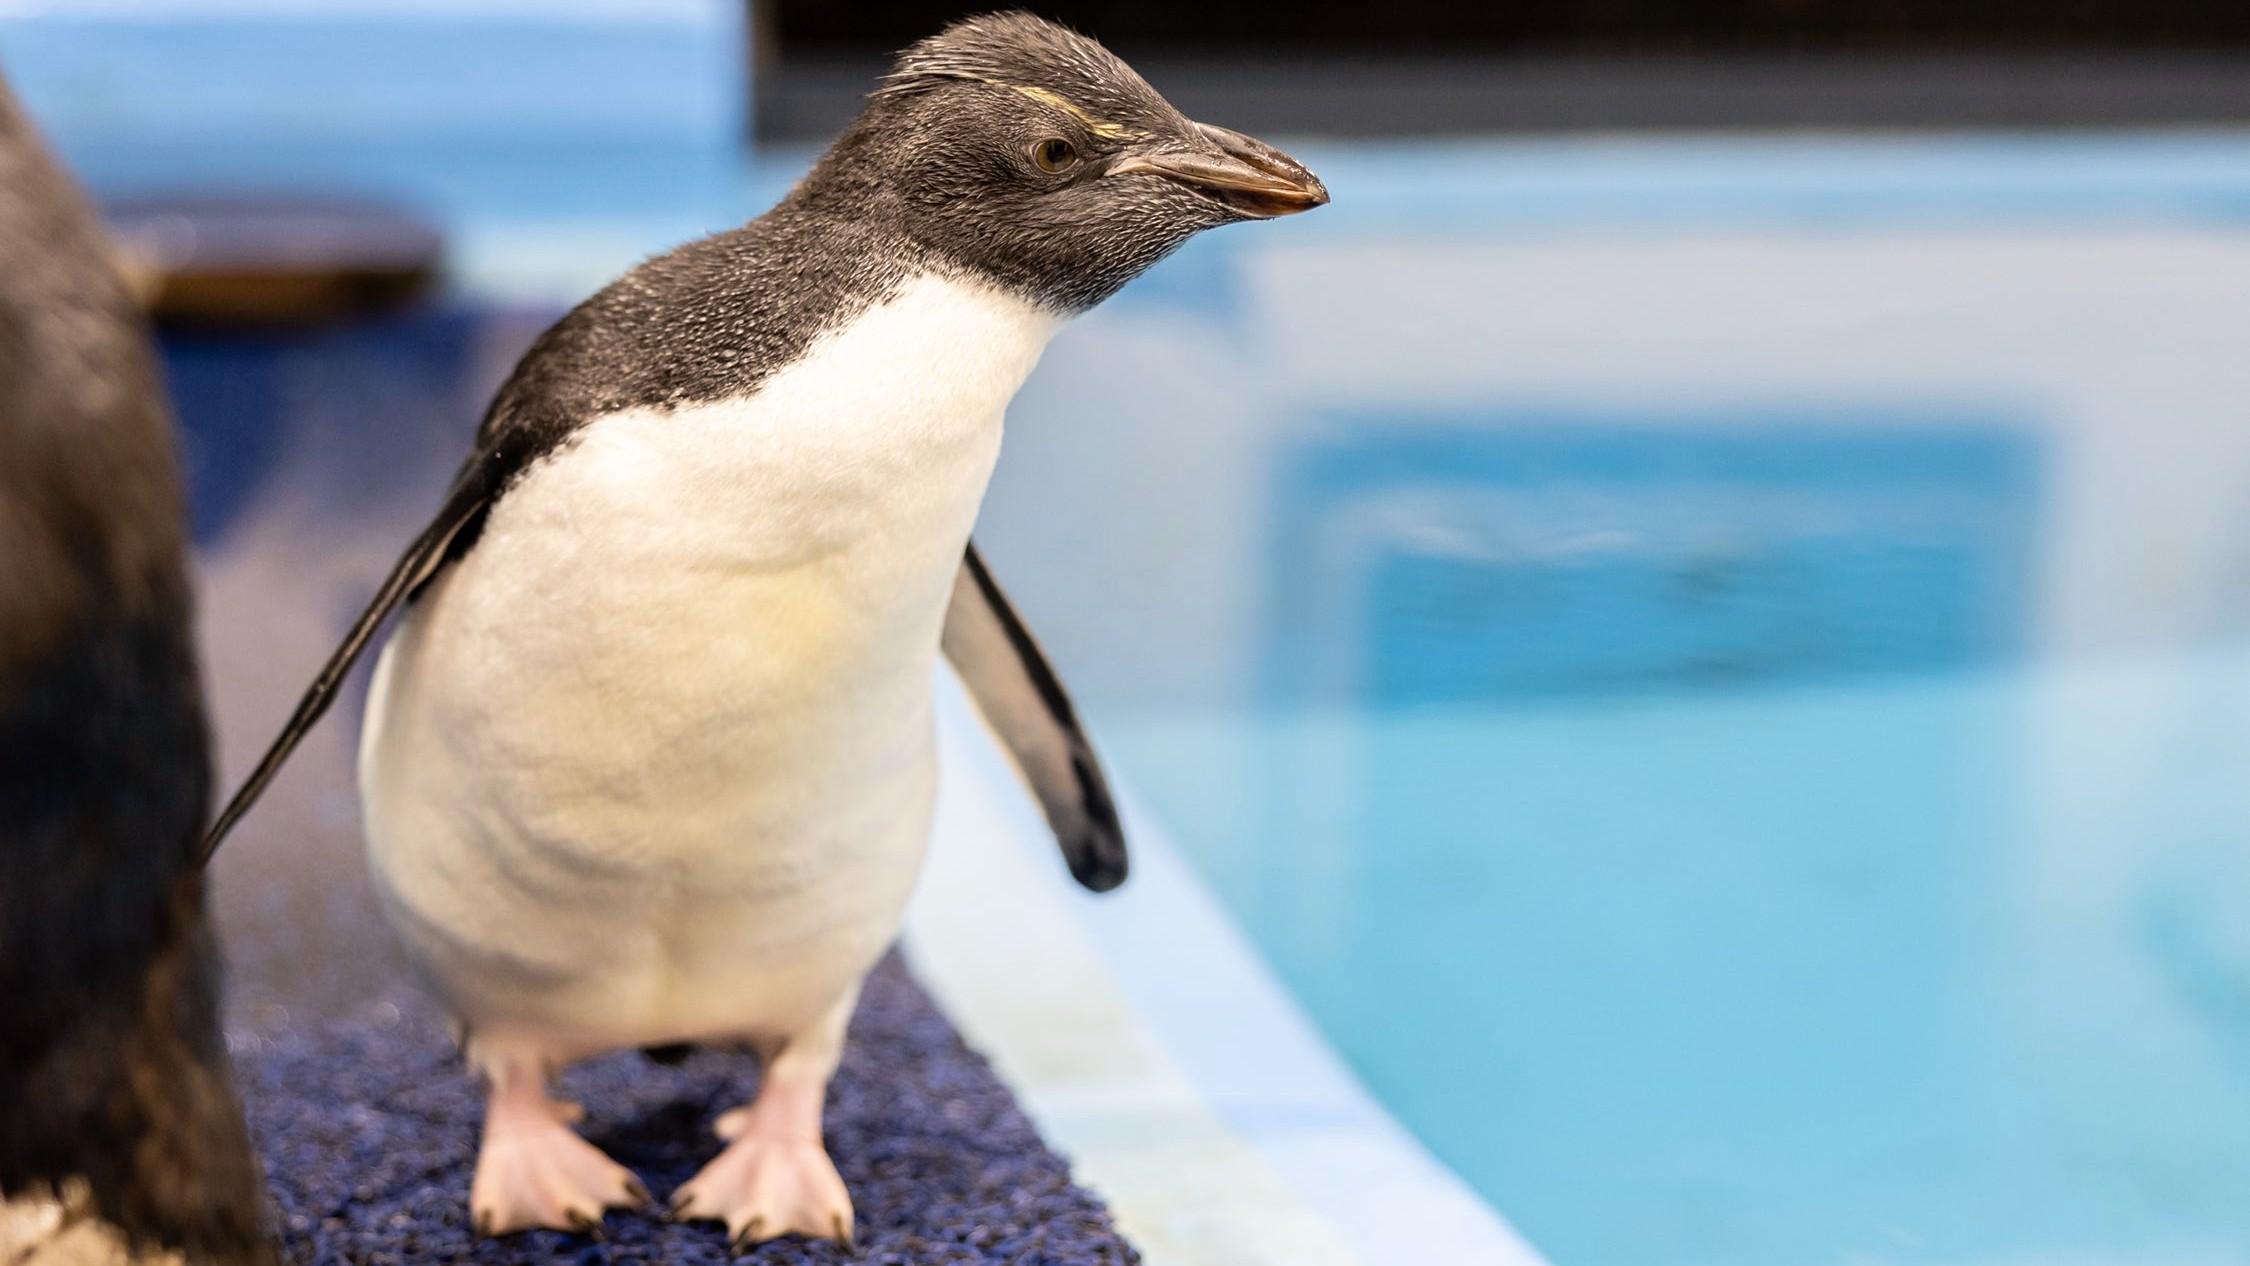 Shedd Aquarium’s newest rockhopper penguin, hatched in June, took its first swim with the entire colony. 